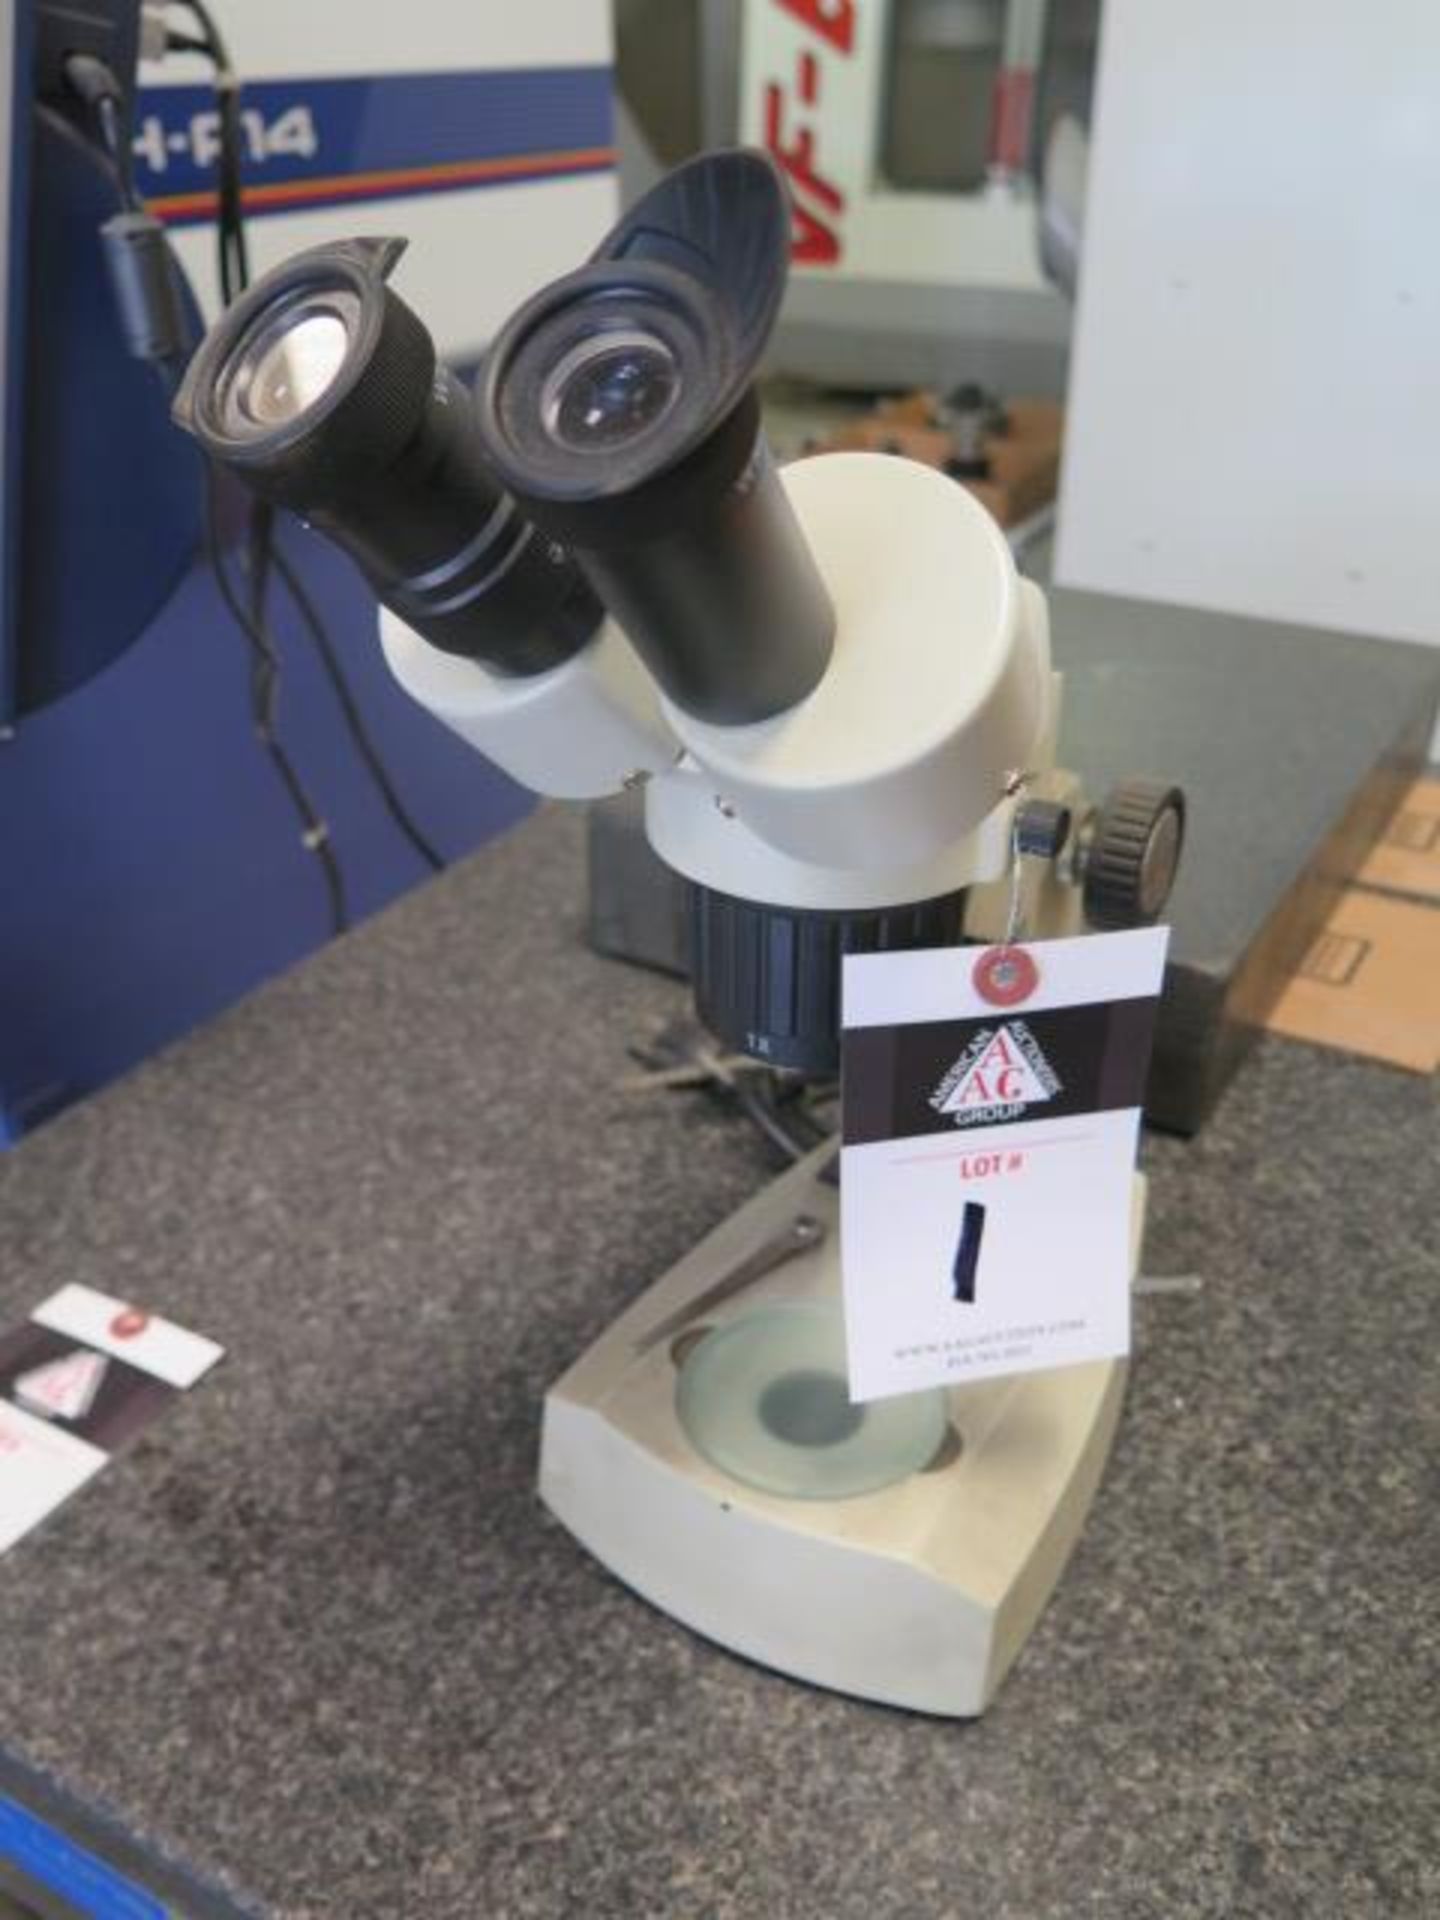 National Stereo Microscope (SOLD AS-IS - NO WARRANTY)